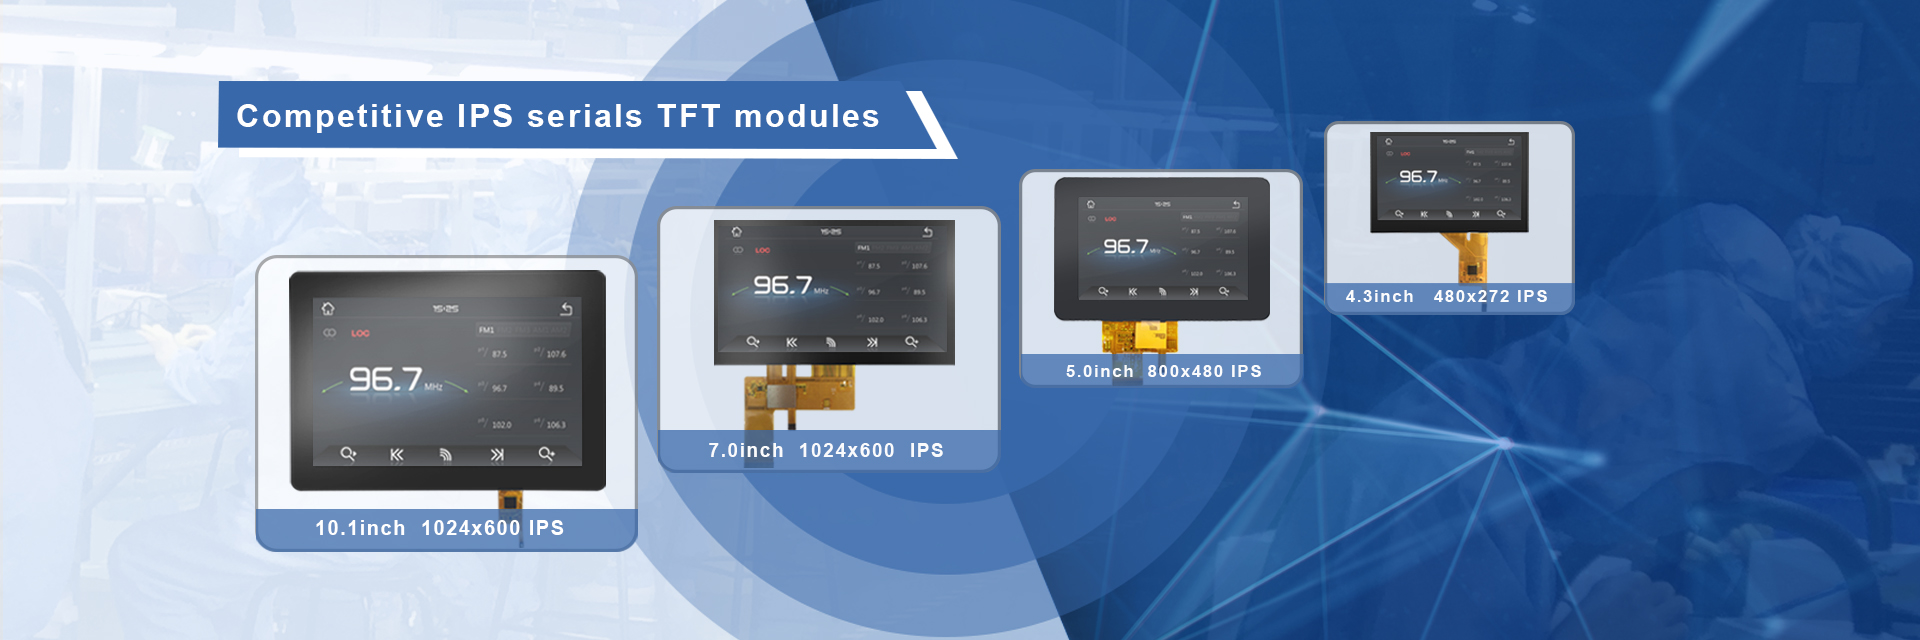 Competitive IPS serials TFT modules